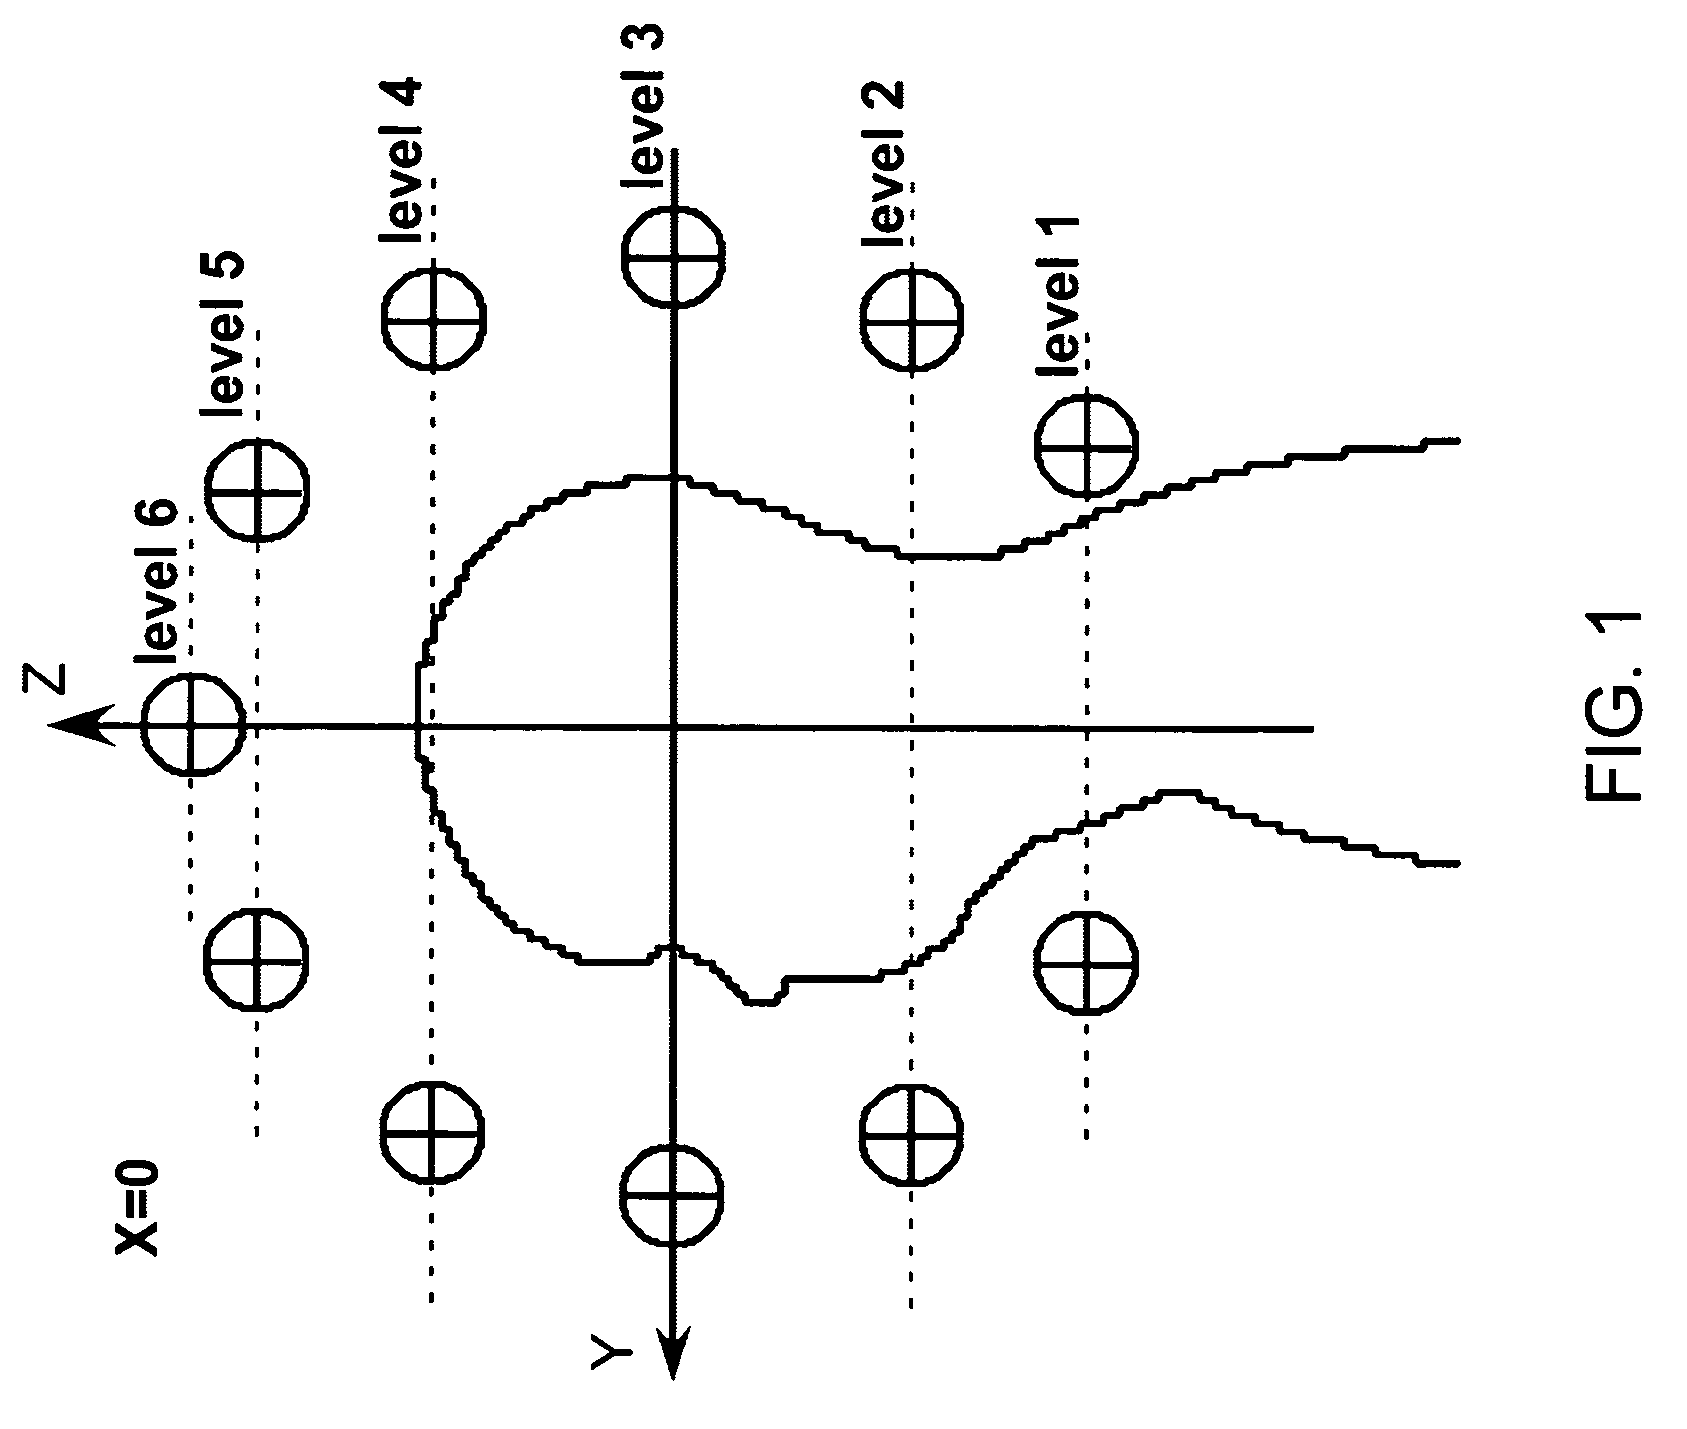 RF coil for a highly uniform B1 amplitude for high field MRI